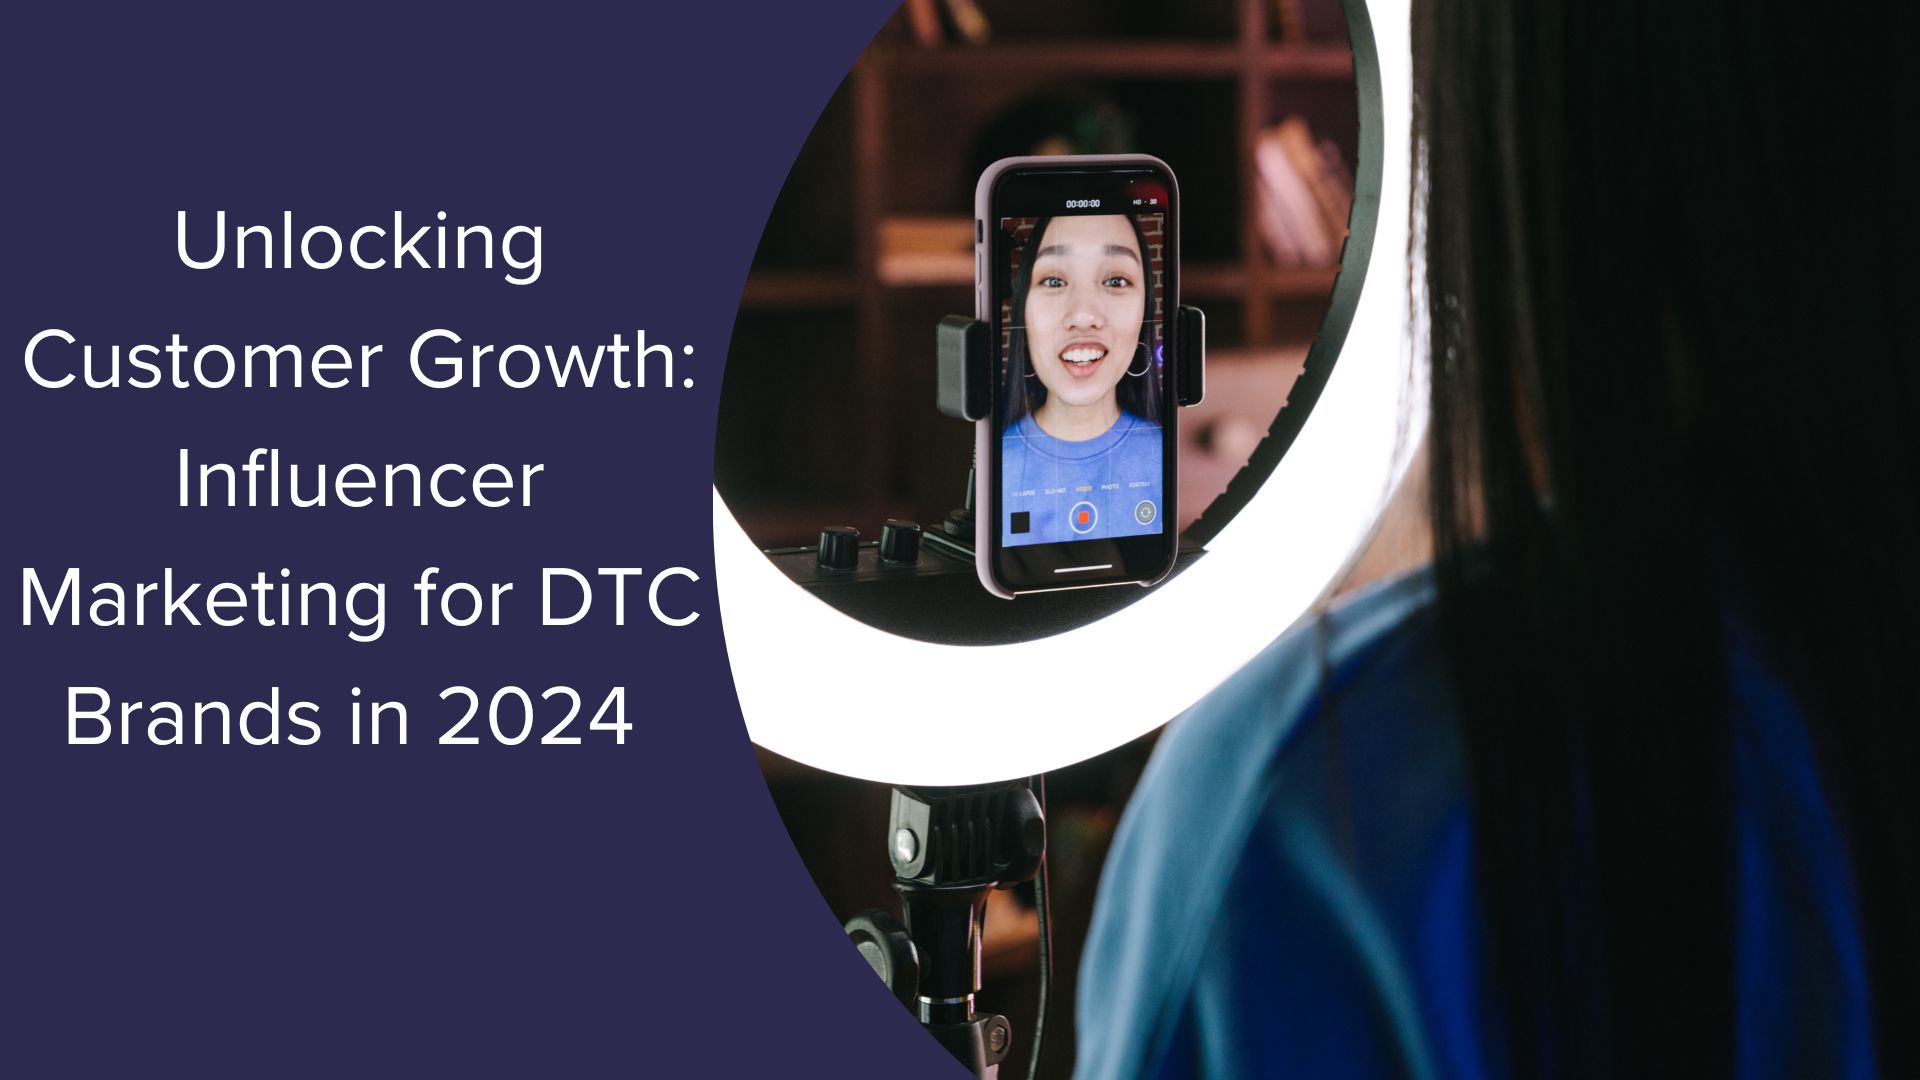 Unlocking Customer Growth: Influencer Marketing for DTC Brands in 2024